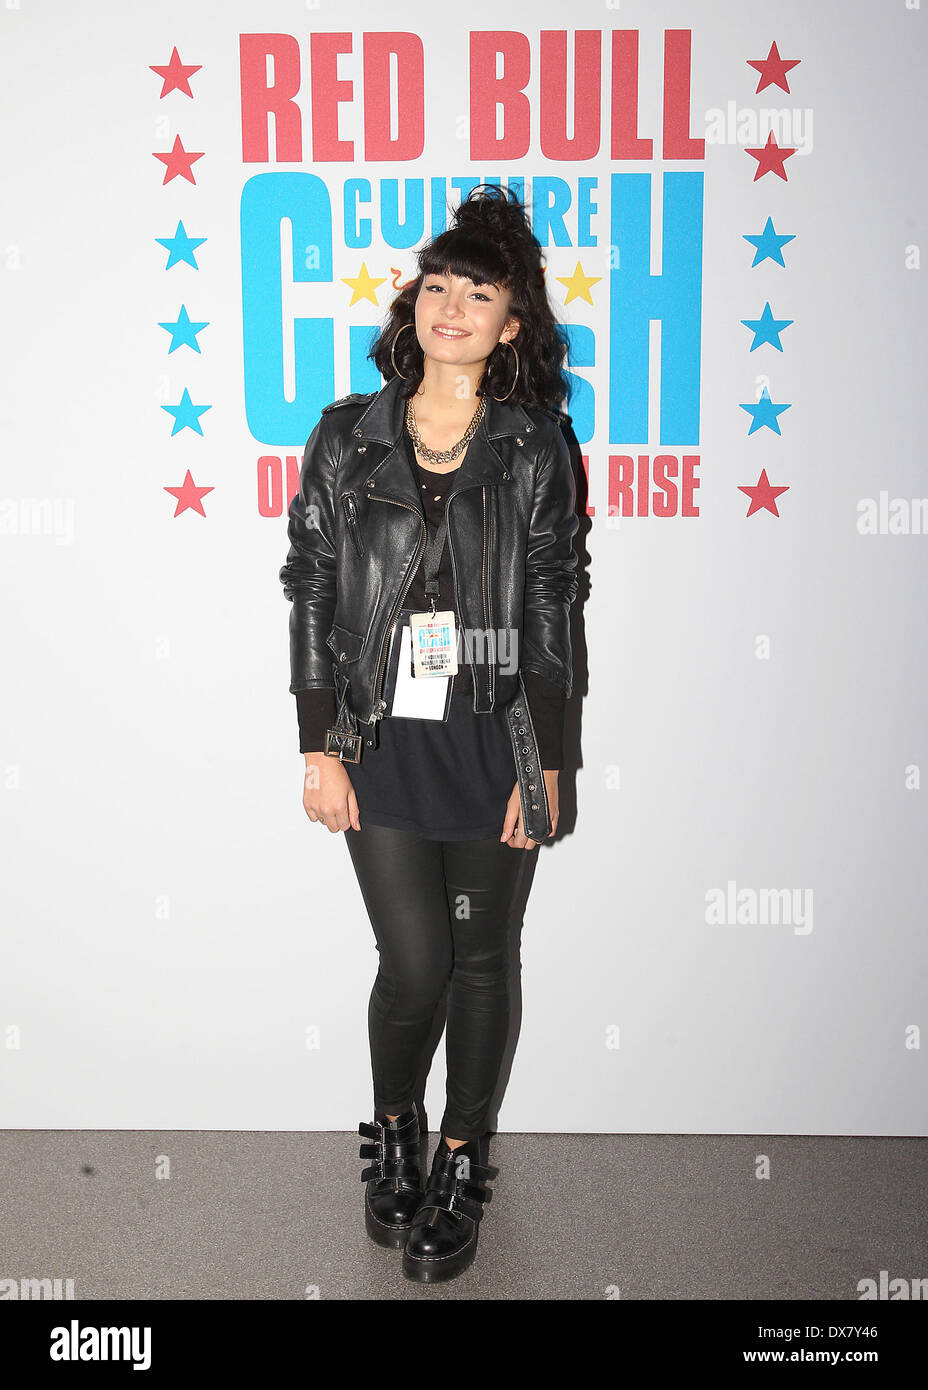 Singer Yasmin arrives at the Red Bull Culture Clash event at Wembley Arena. London, England - 07.11.12 Featuring: Singer Yasmin arrives at the Red Bull Culture Clash event at Wembley Arena. London,England - 07.11.12 Where: London, United Kingdom When: 07 Nov 2012 Stock Photo